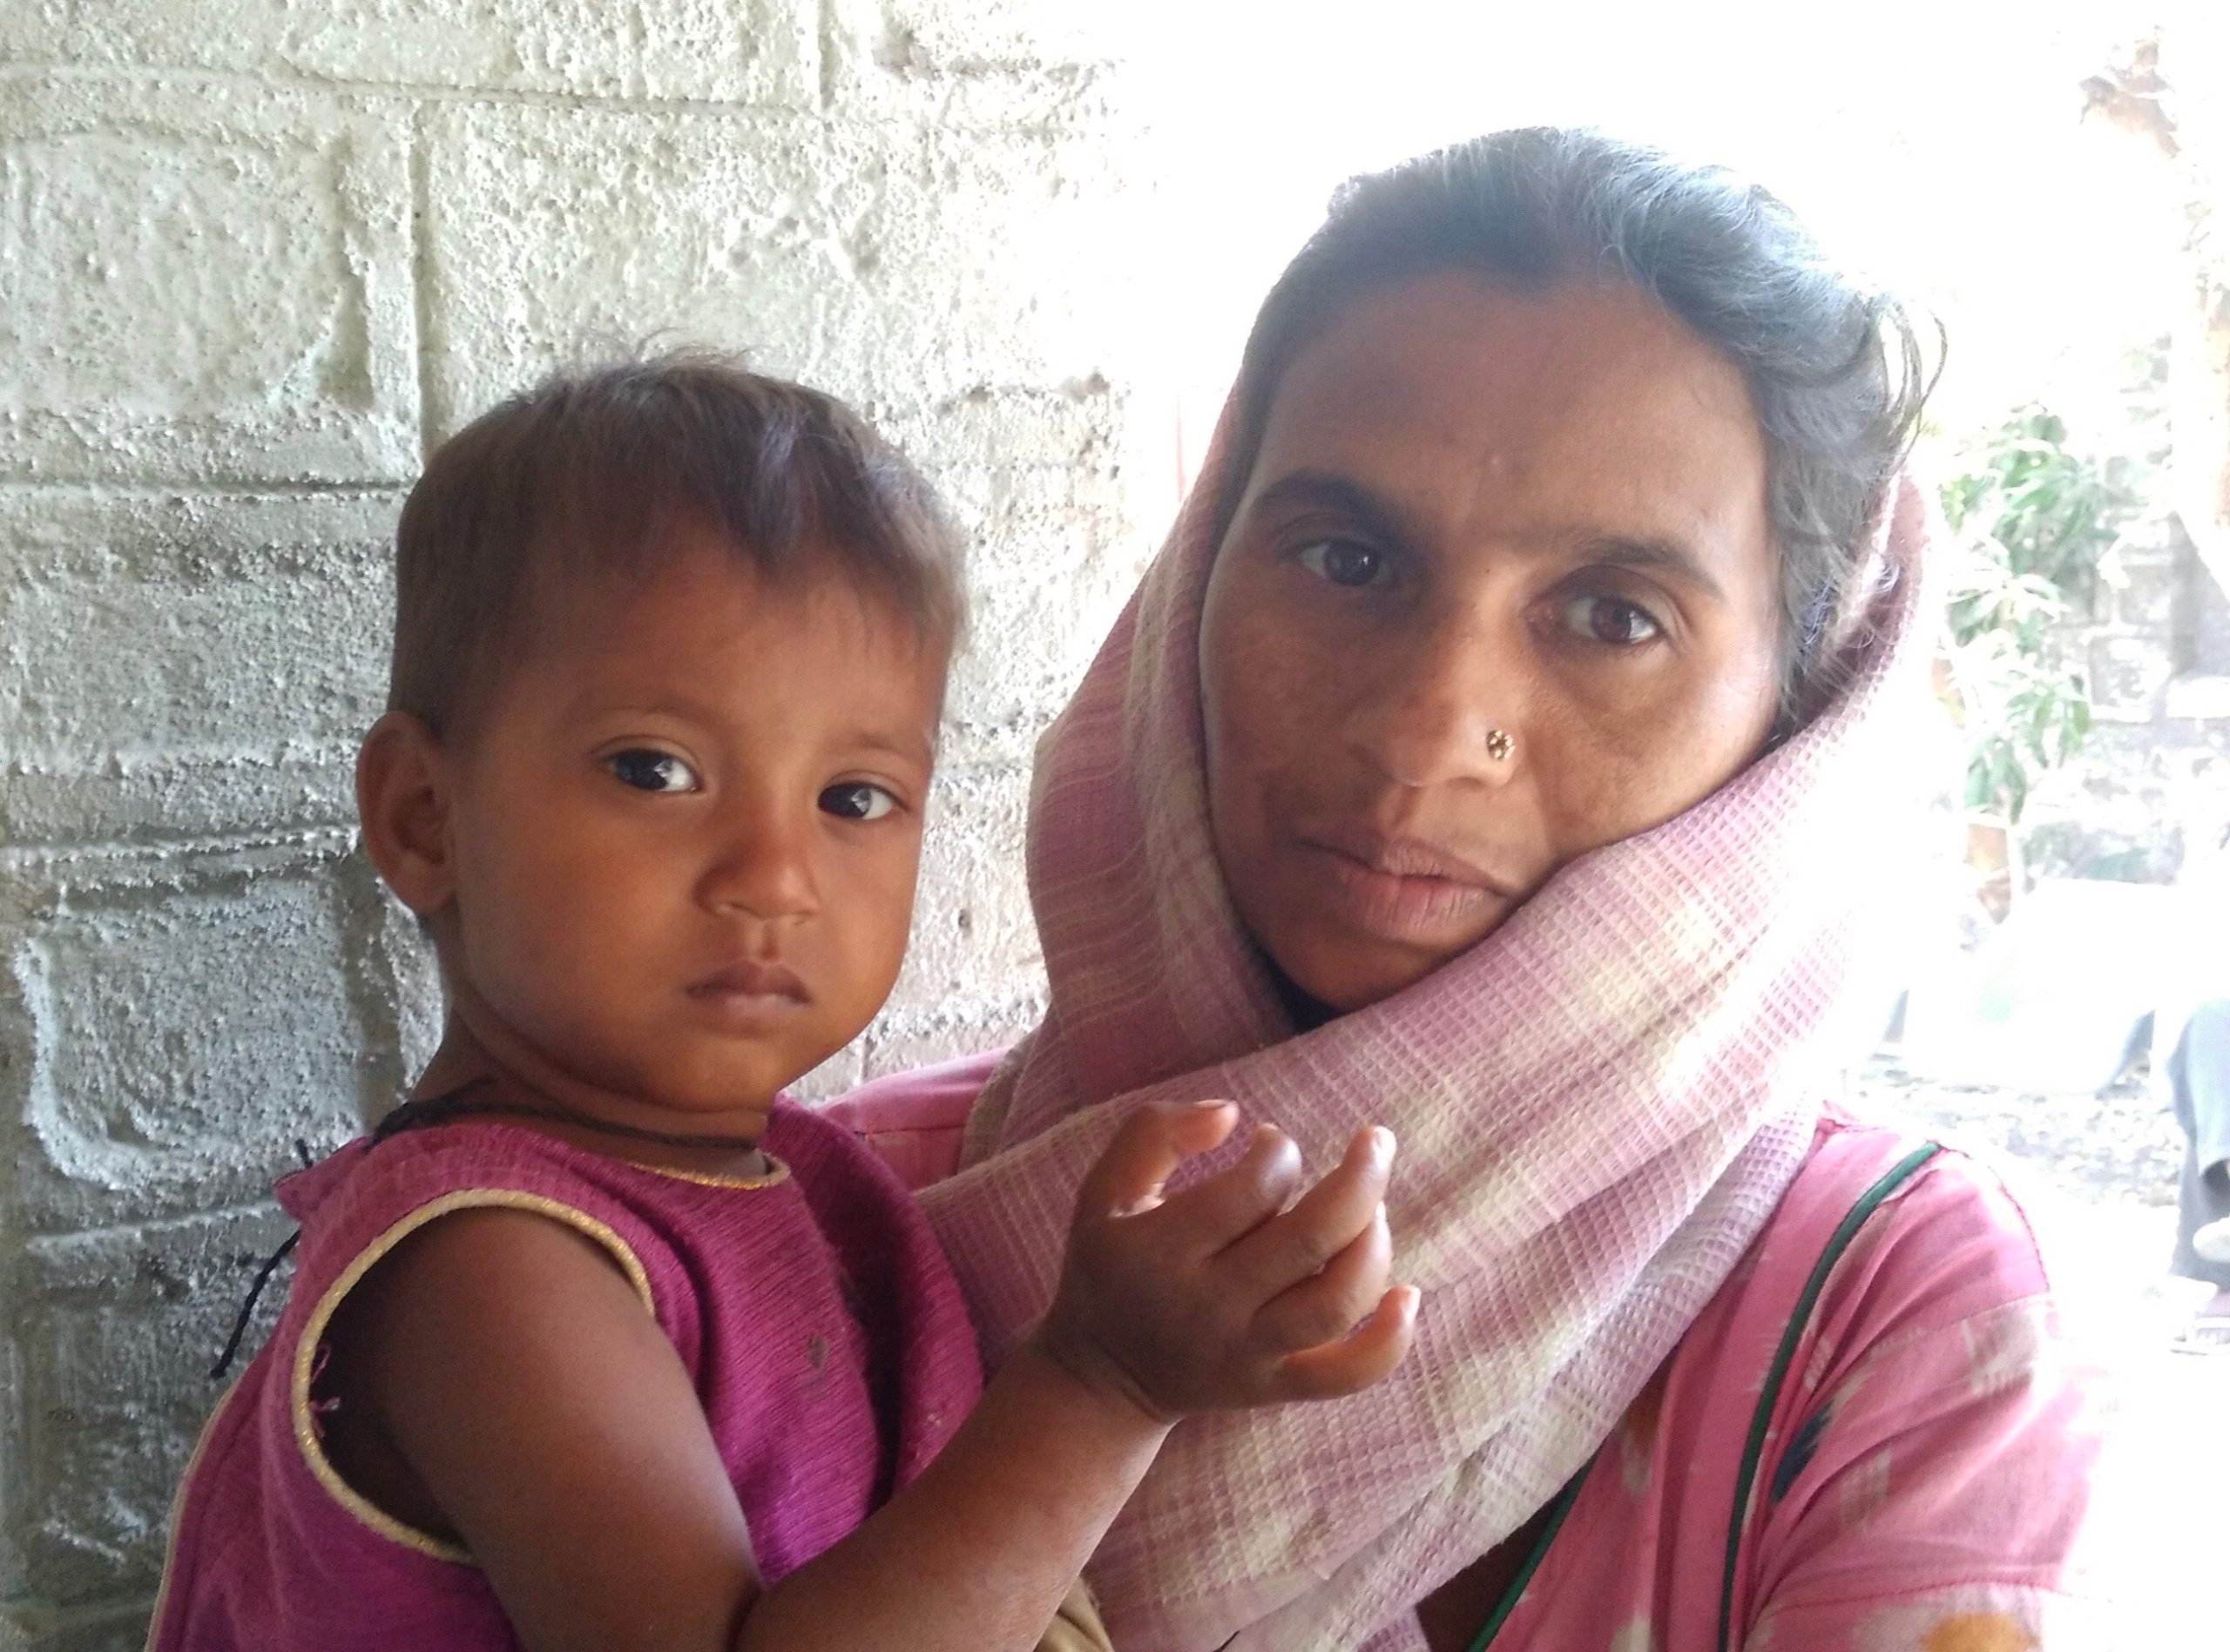 Low-cost healthcare helped Sarita get the TB treatment she desperately needed